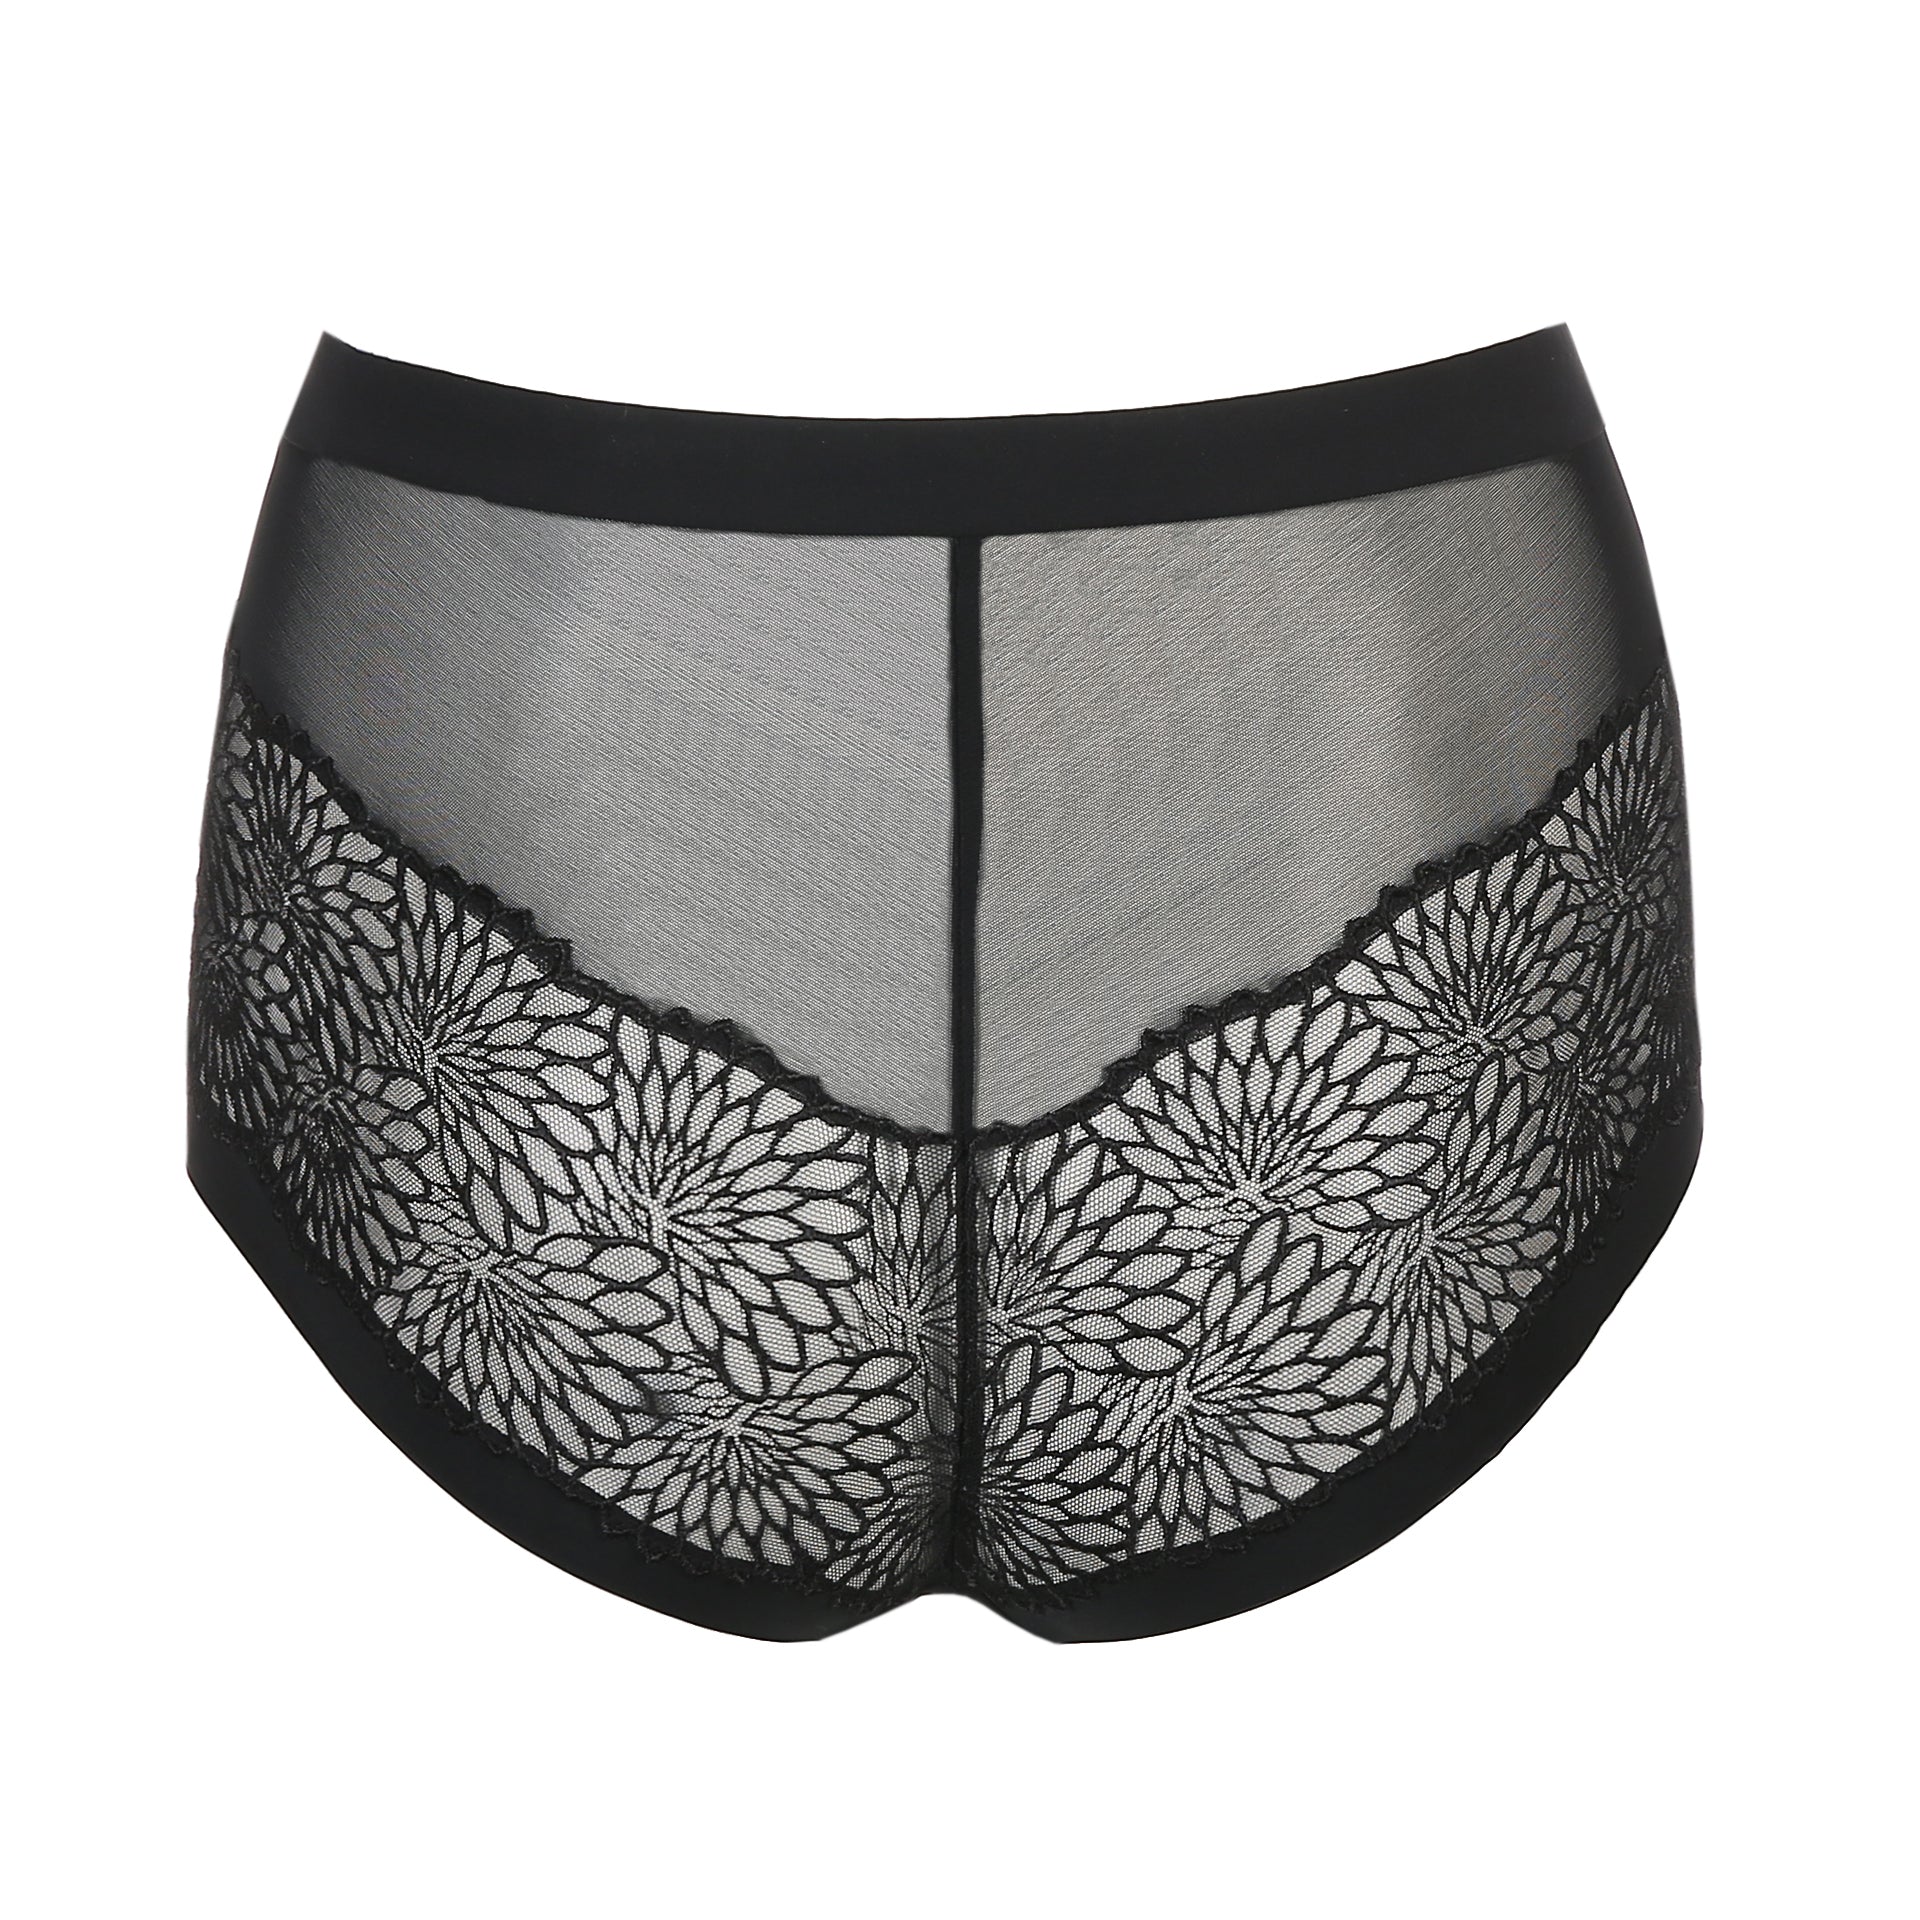 Back view of the Sophora high-waisted cheeky panty in Black by PrimaDonna.